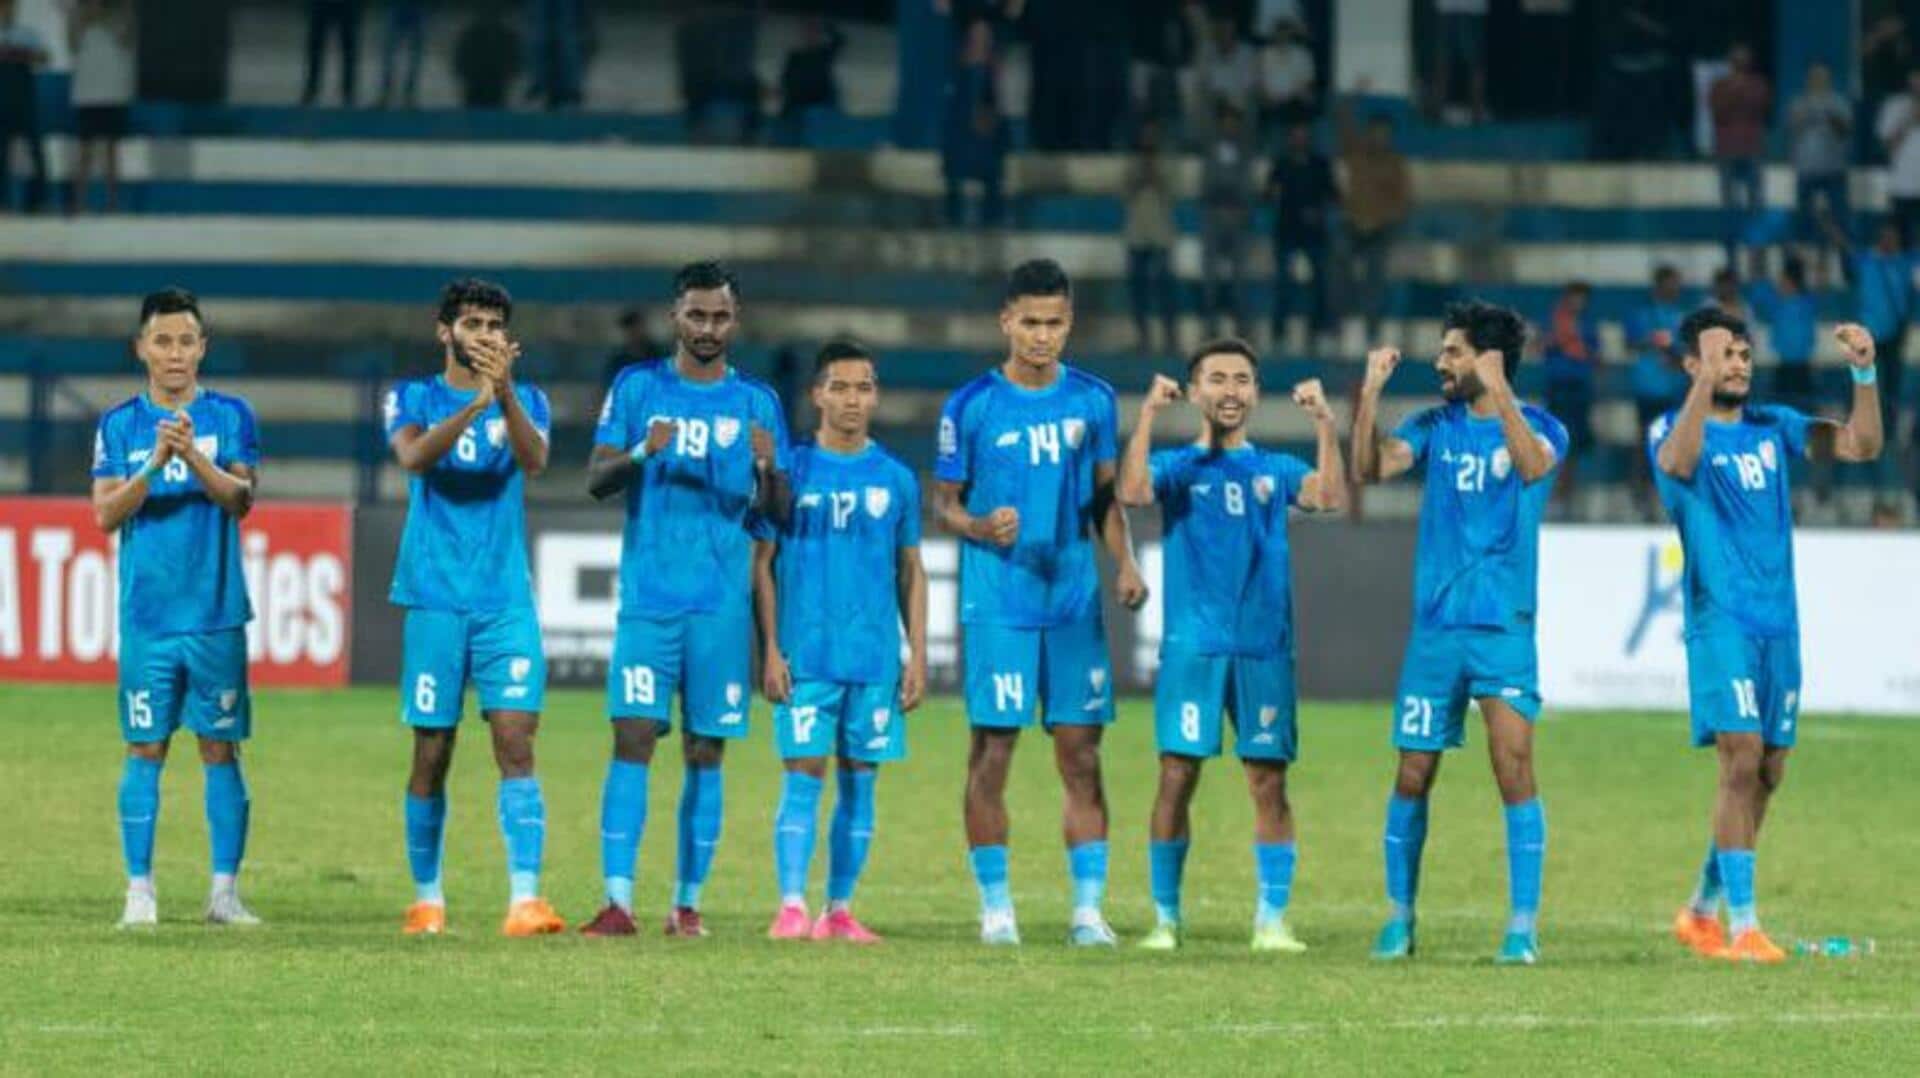 Merdeka Cup: India to face hosts Malaysia in semi-finals